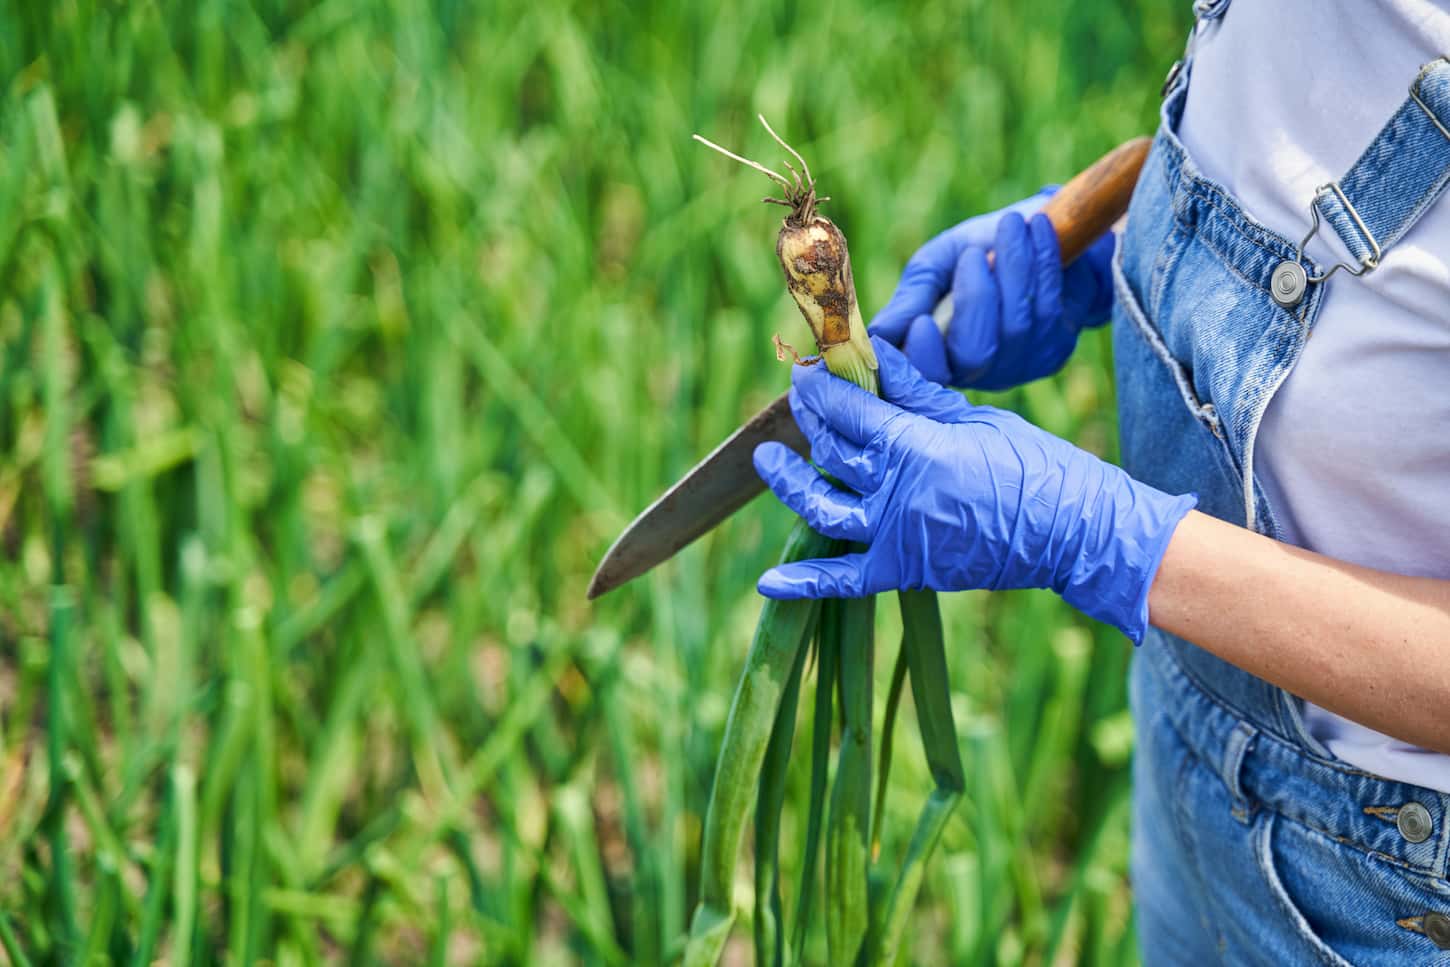 An image of a female farmer harvesting onions with green feathers in the onion field.